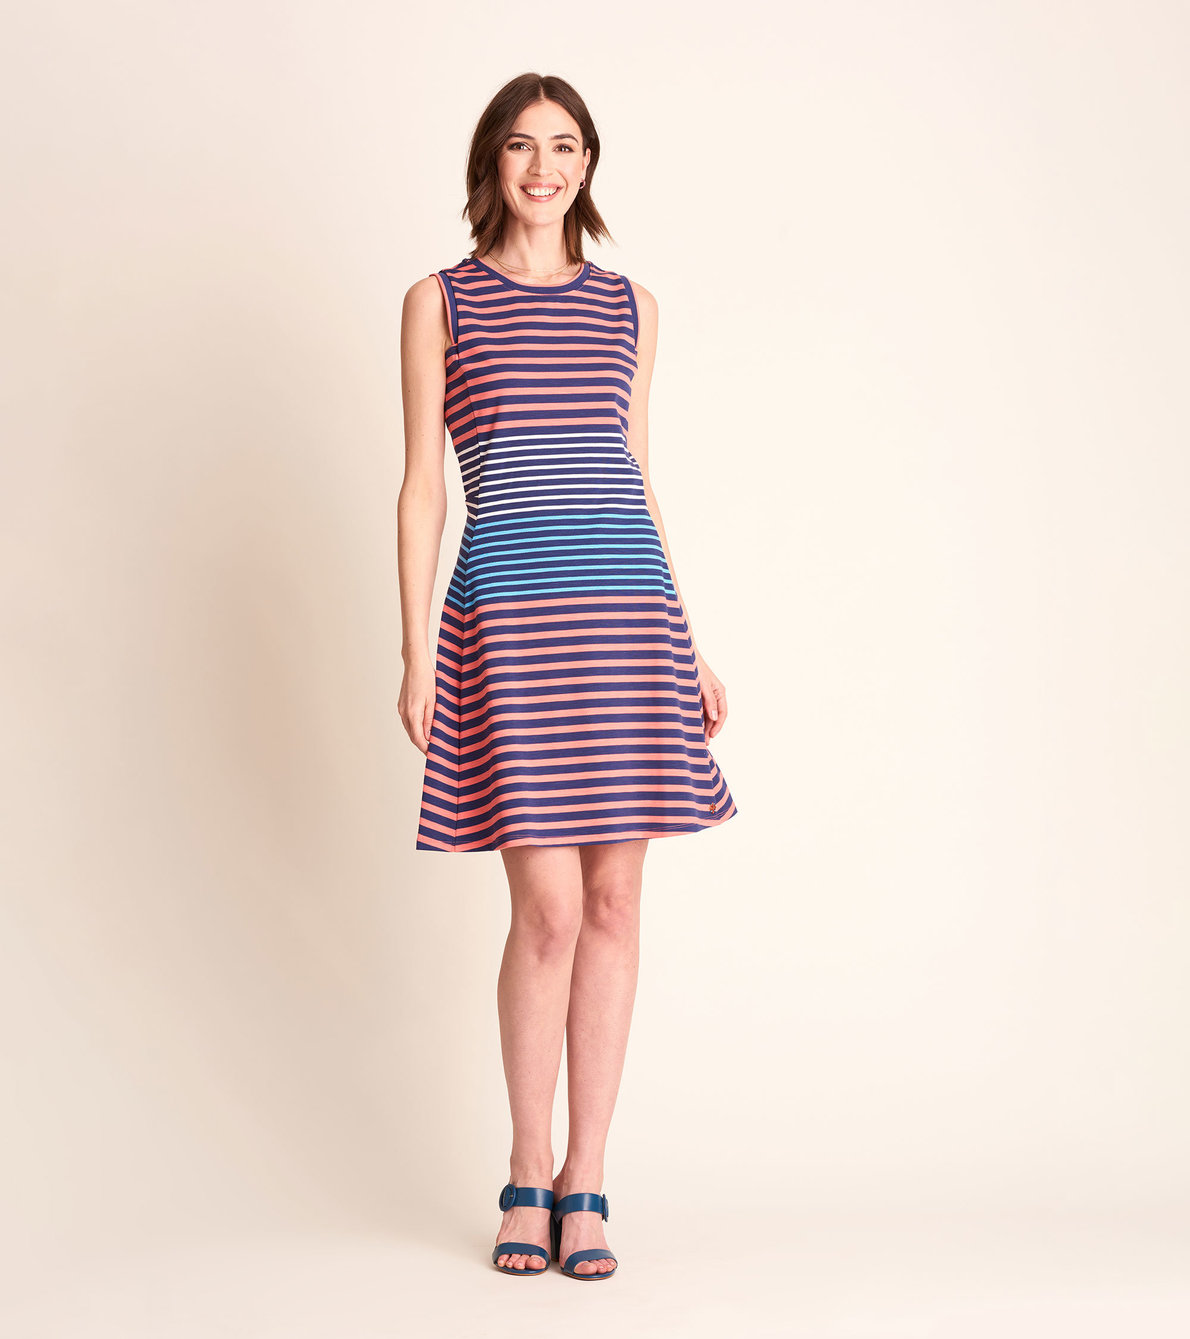 View larger image of Sarah Dress - Navy and Coral Stripes